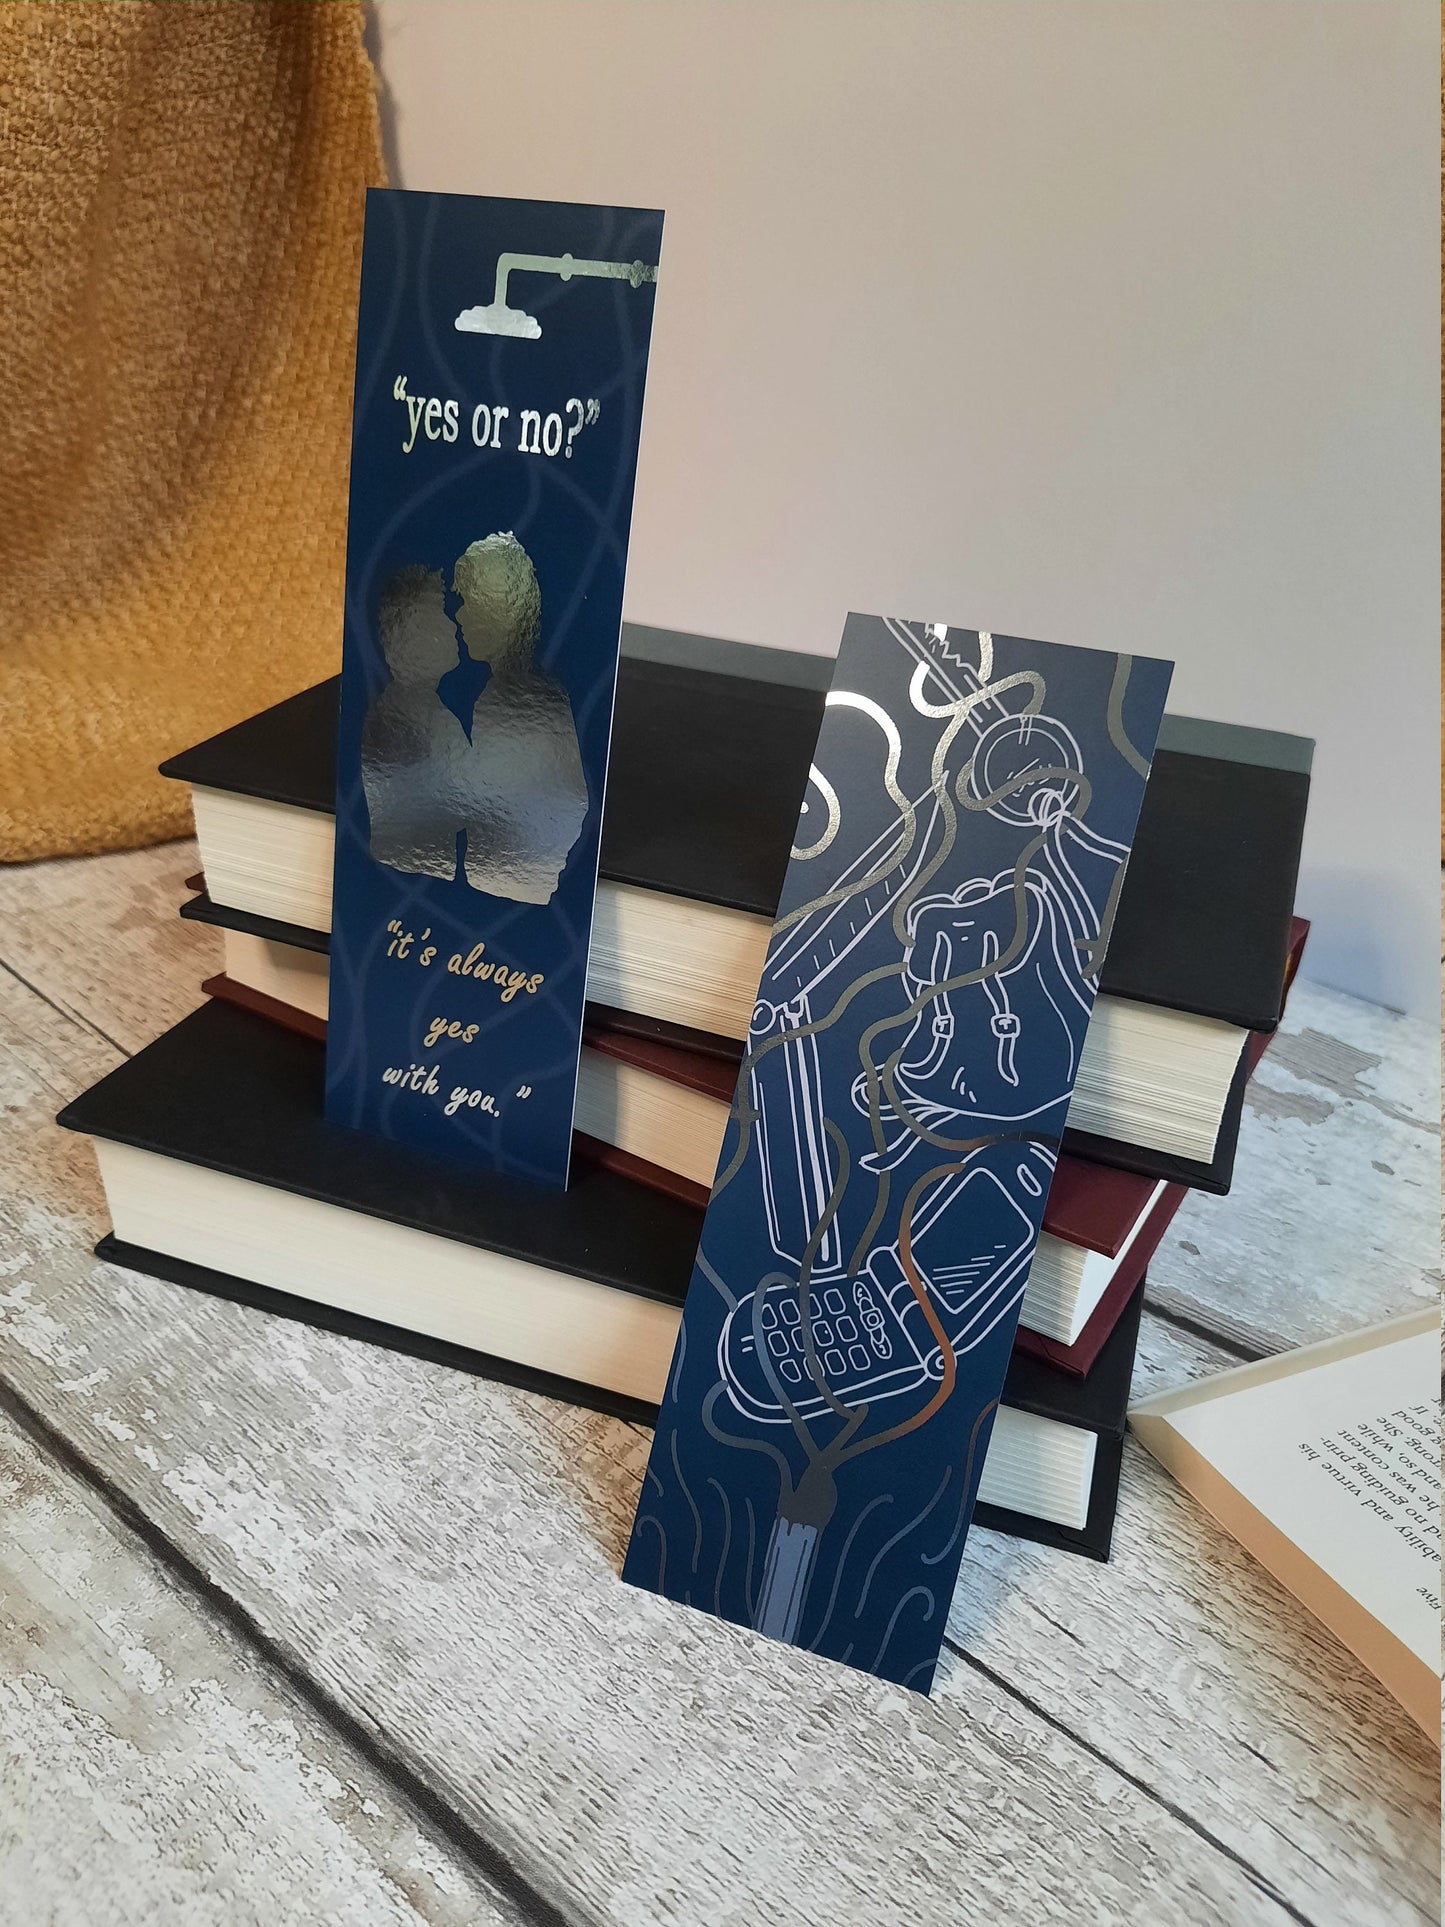 Yes or No? - Silver foiled bookmark - All For the Game/The Foxhole Court by Nora Sakavik